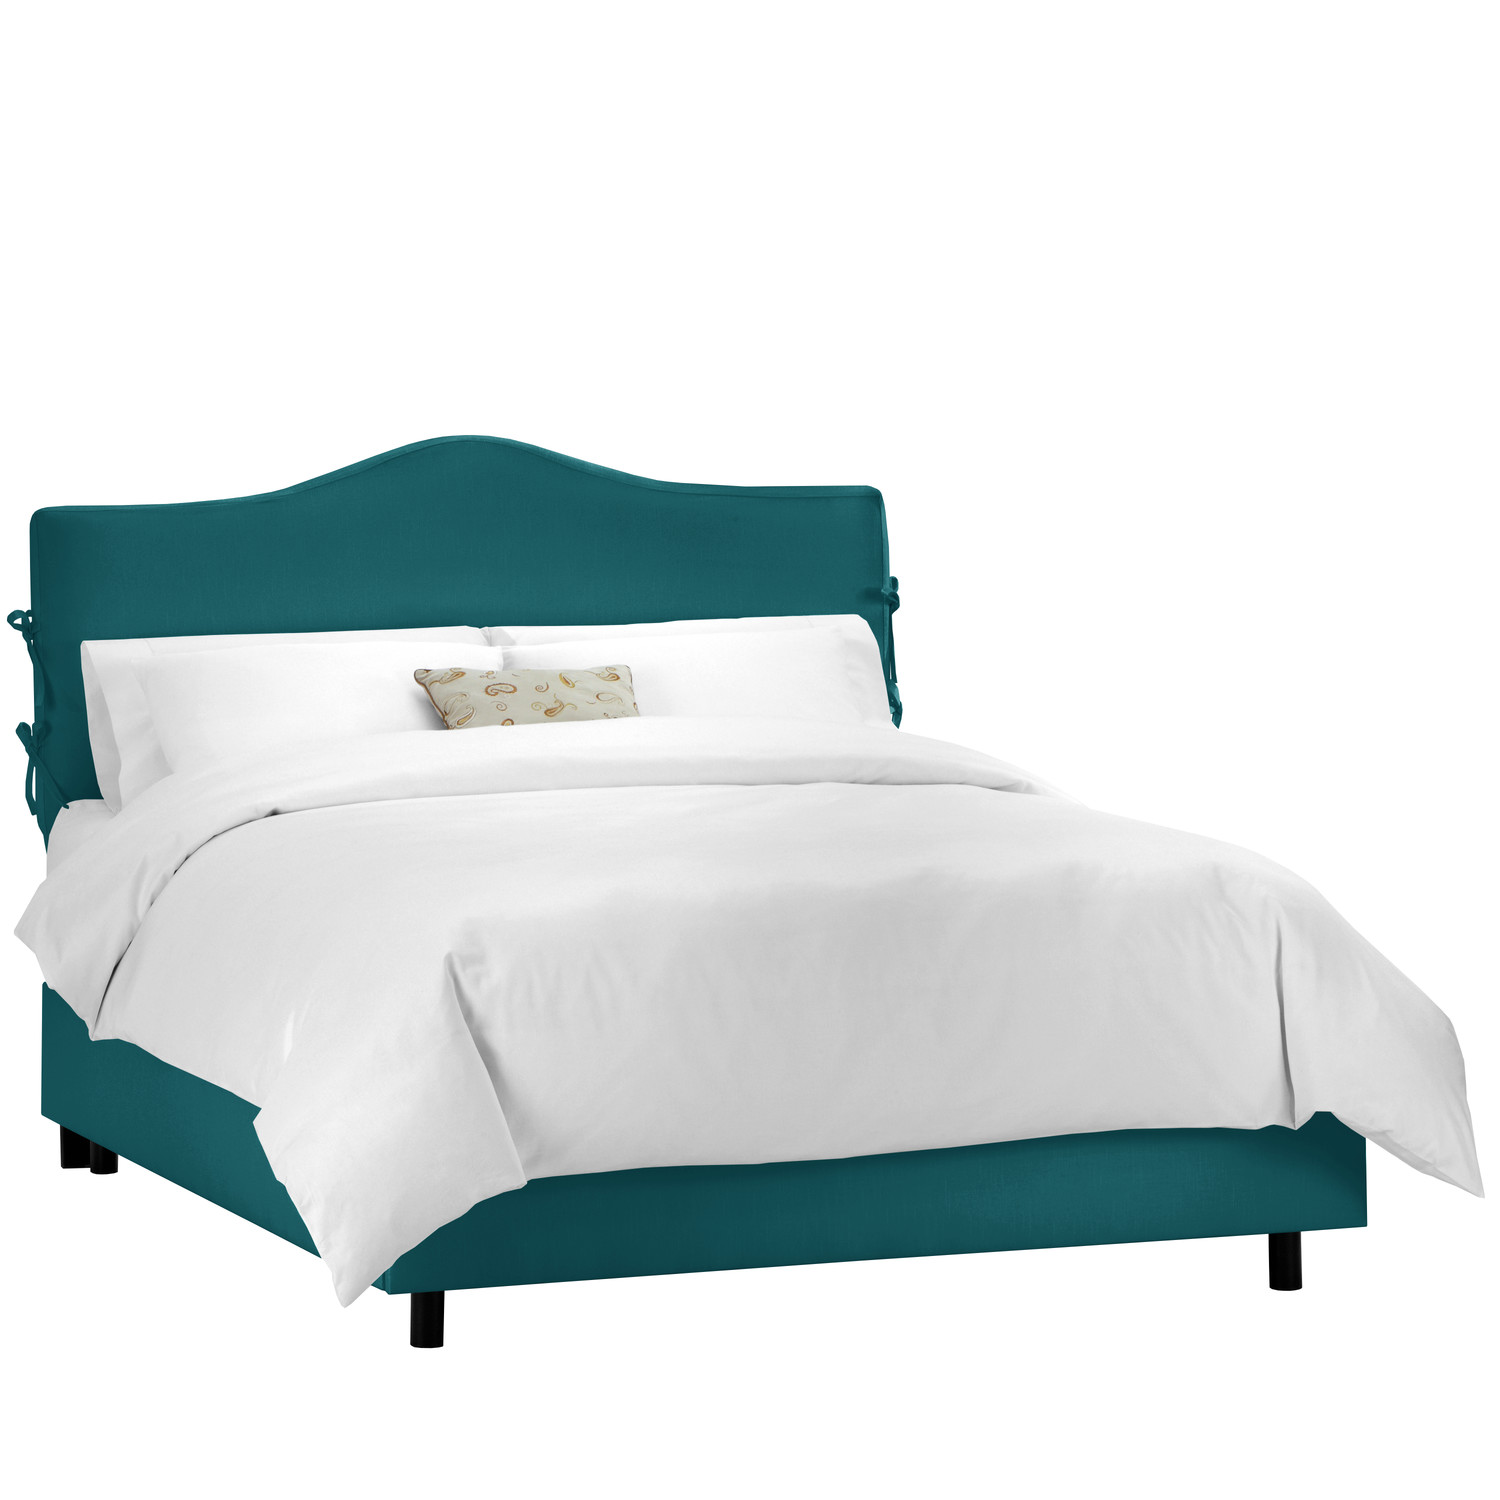 Alcott Hill Slipcover Bed With Ties, Jcp King Headboards